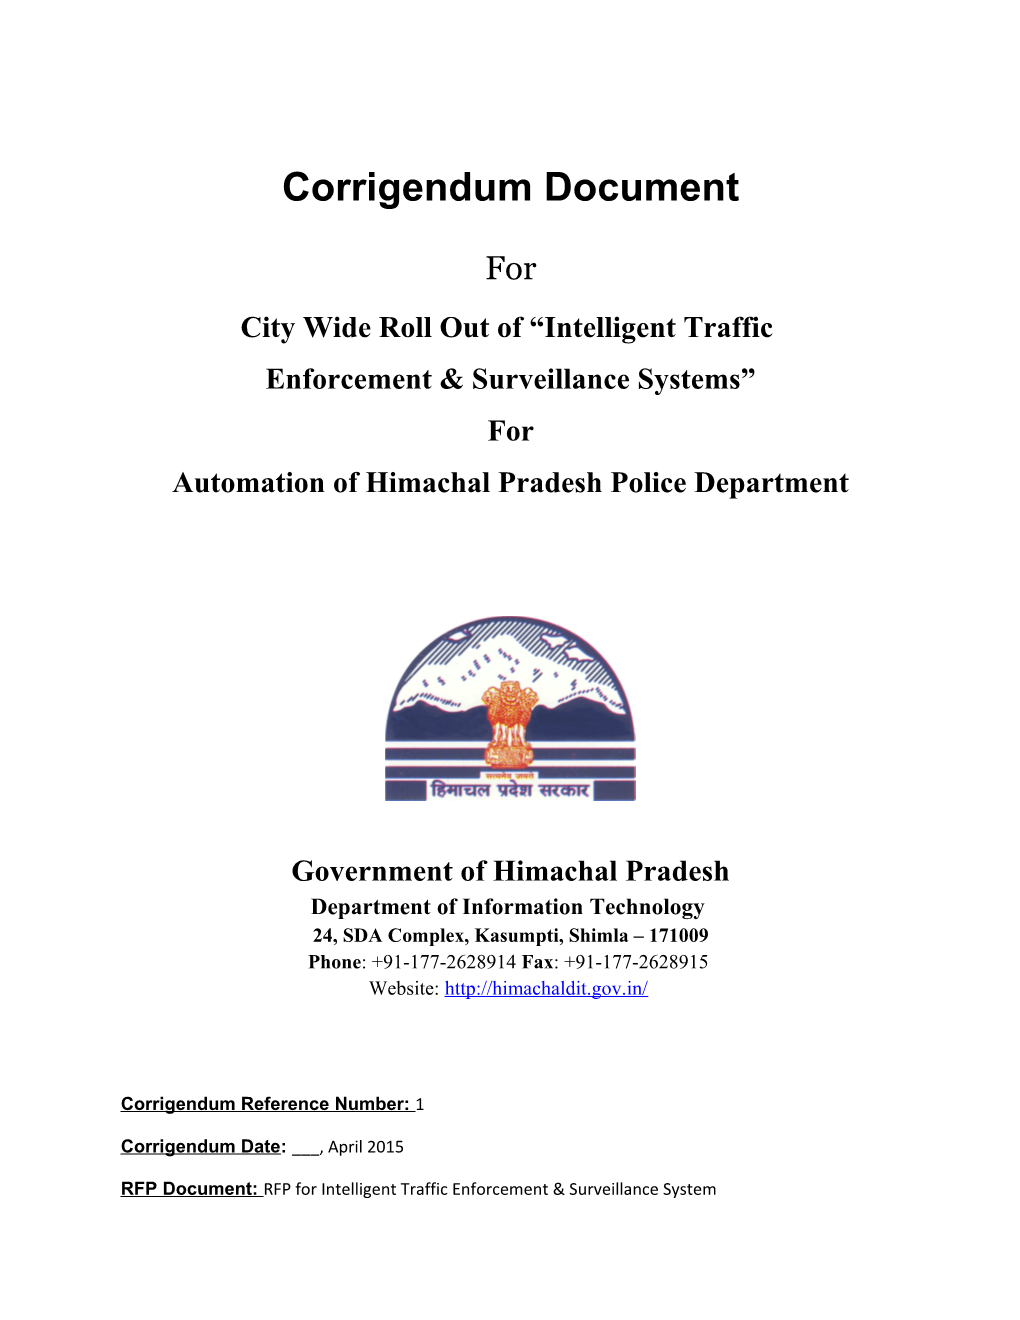 City Wide Roll out of Intelligent Traffic